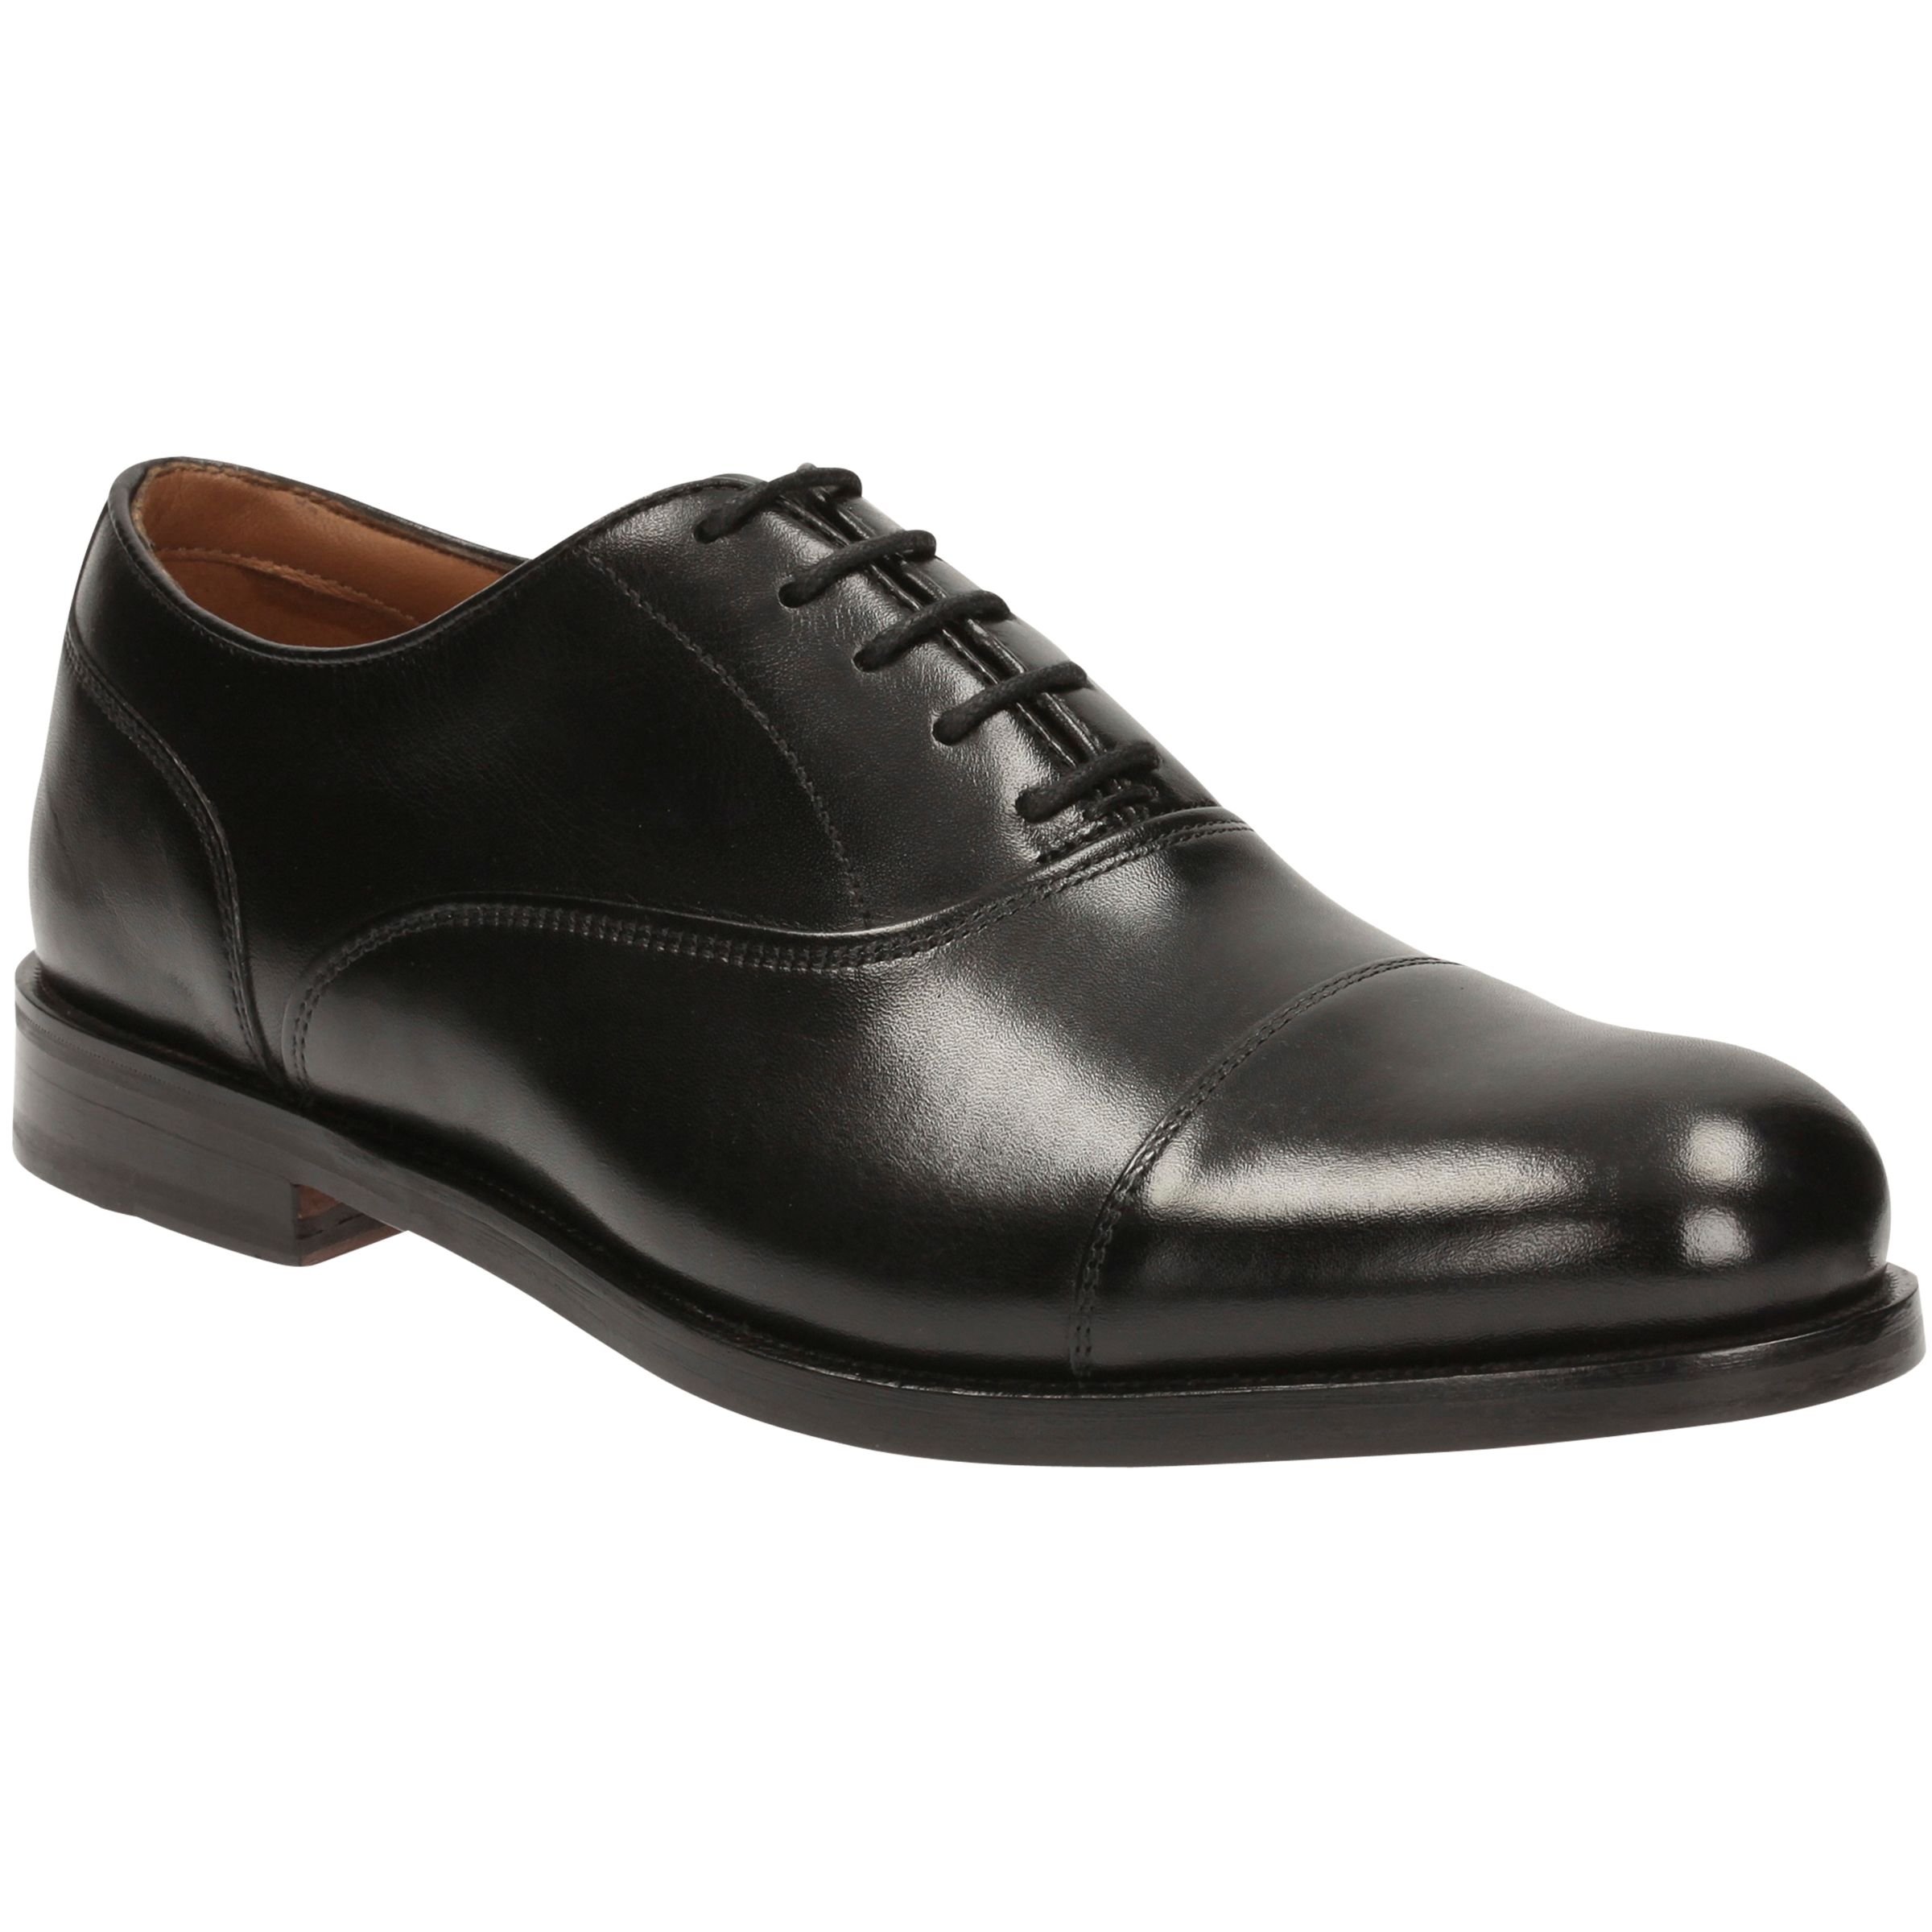 Clark Coling Boss Oxford Shoe, Black at 